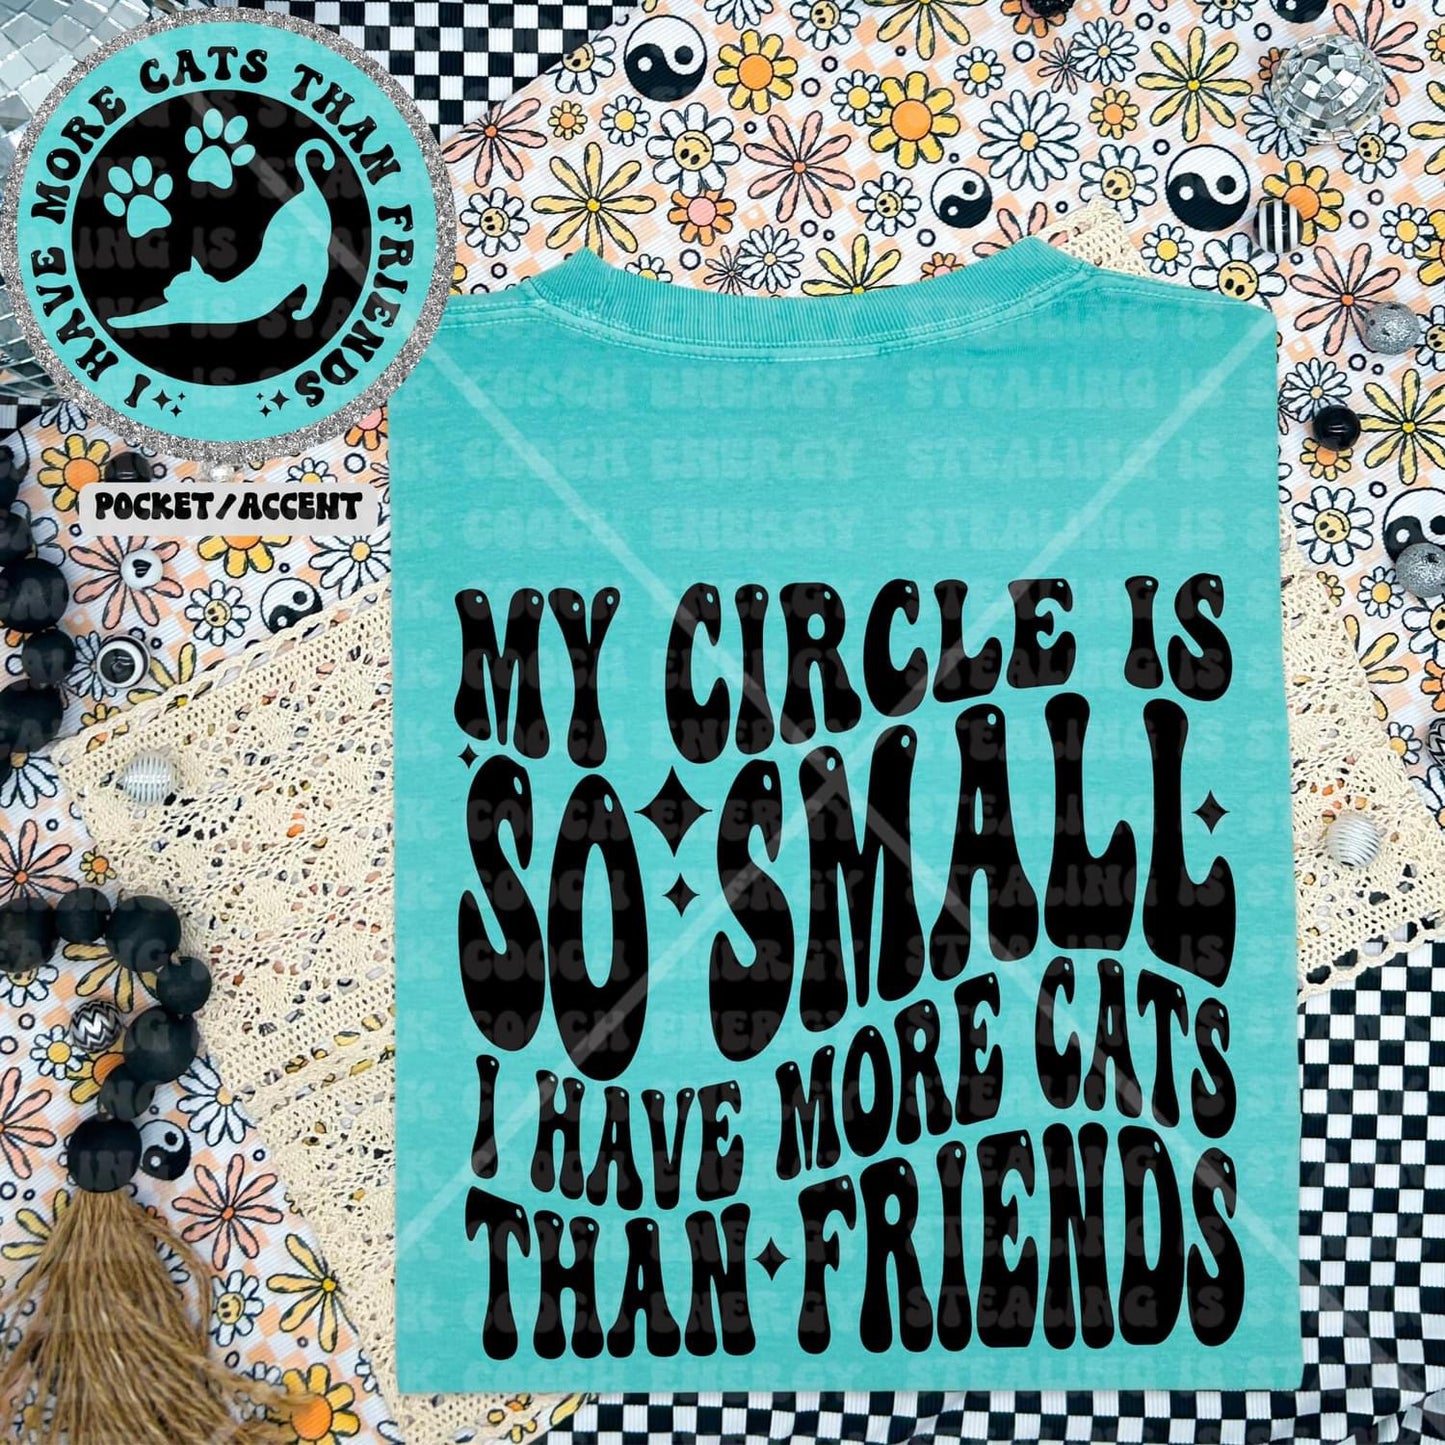 My circle is so small I have more kids then friends